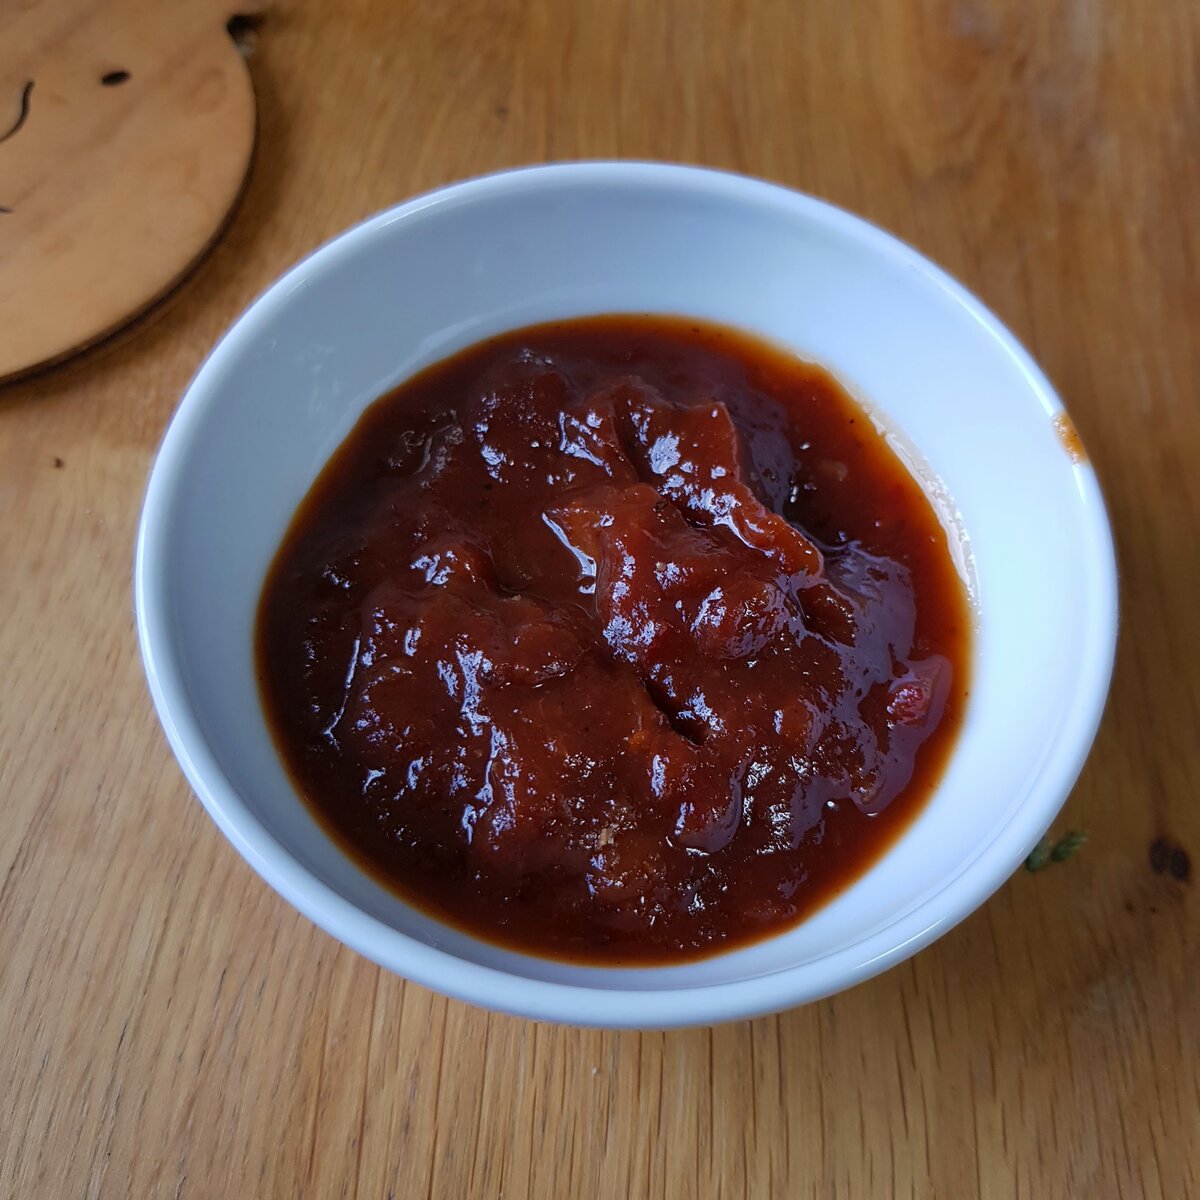 A sample of the Spicy Pear Chutney